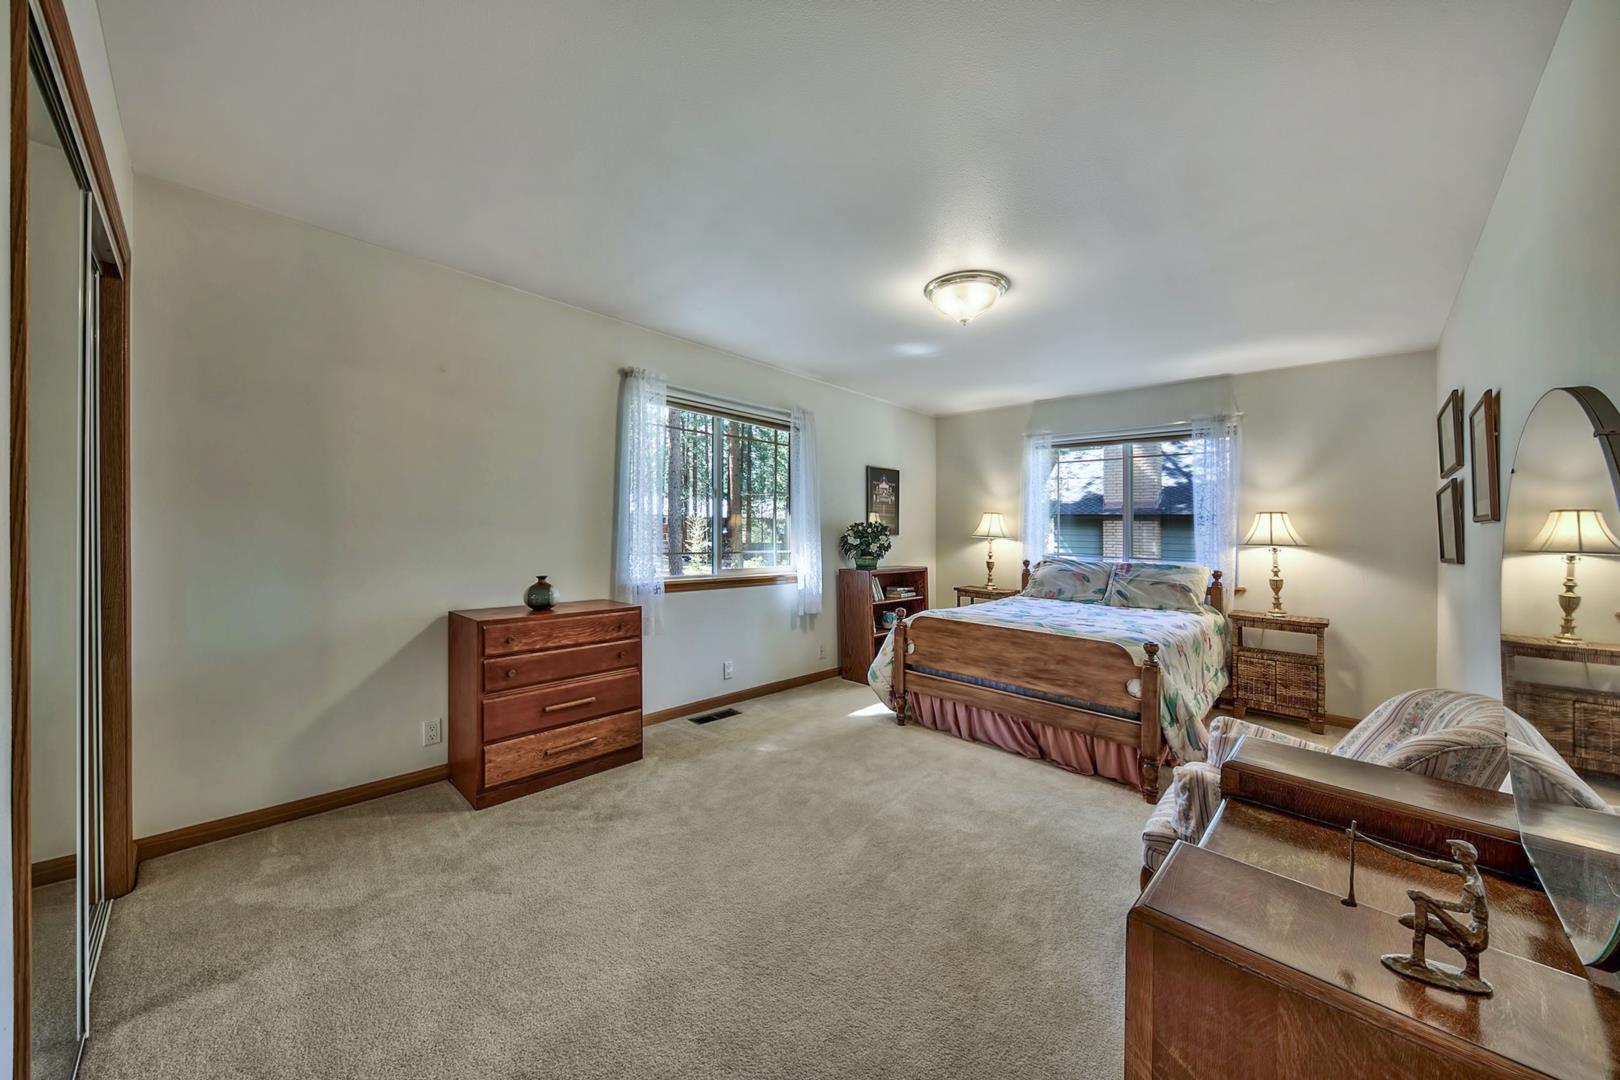 1180 Winnemucca Ave - Why you should love it